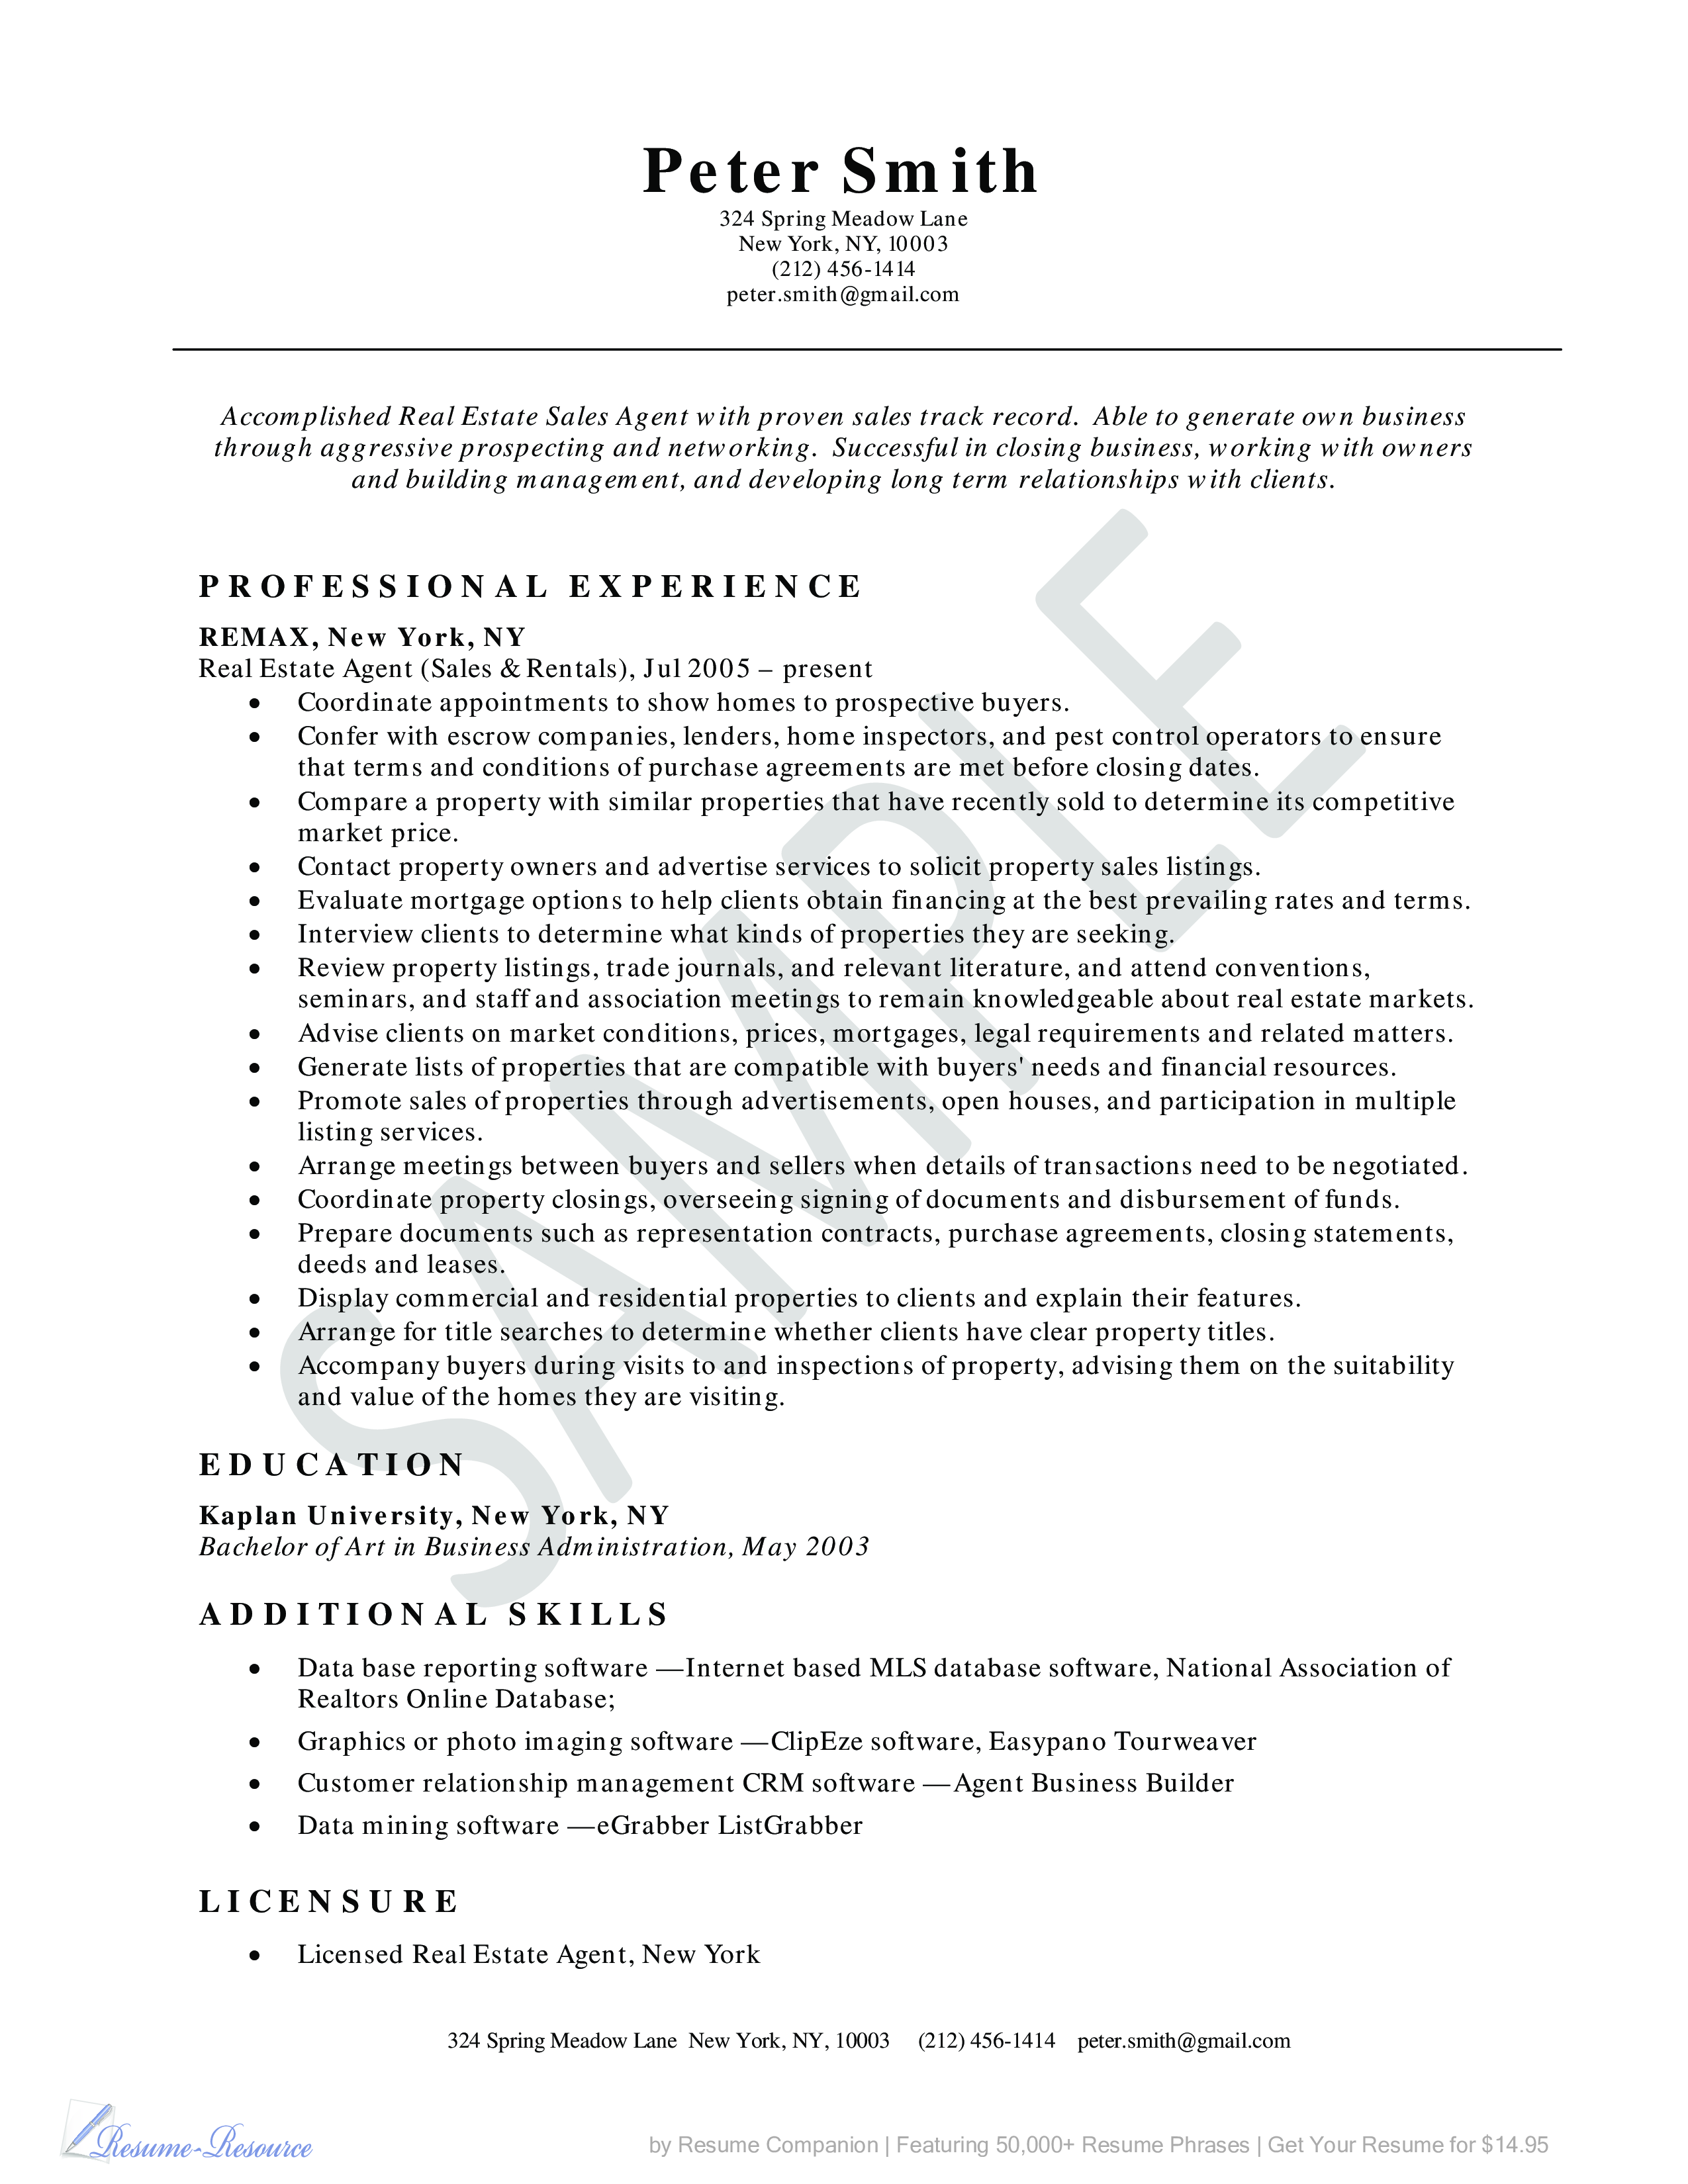 resume template for real estate agents